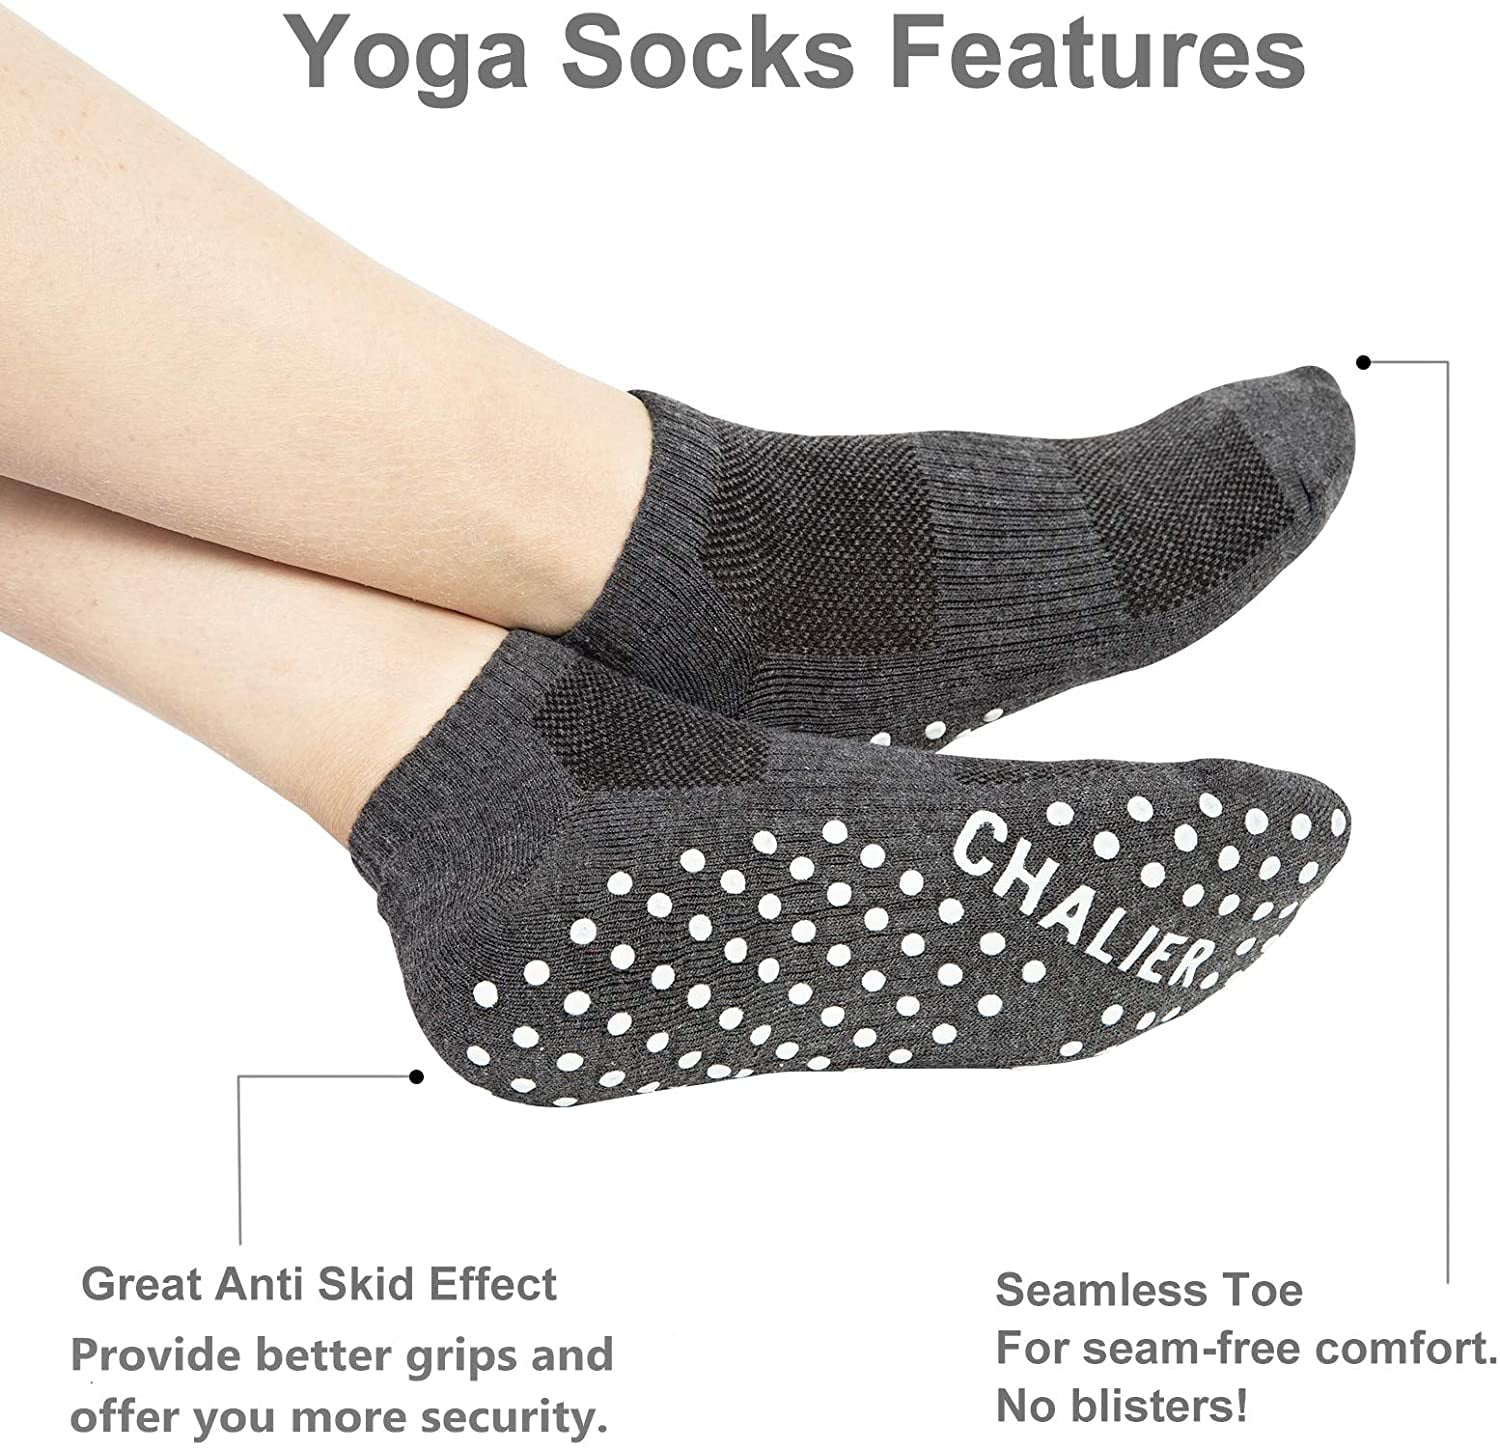 Non Slip Yoga Socks for Women 6 Pairs Ankle Low Cut Pilates Barre Socks with Grips